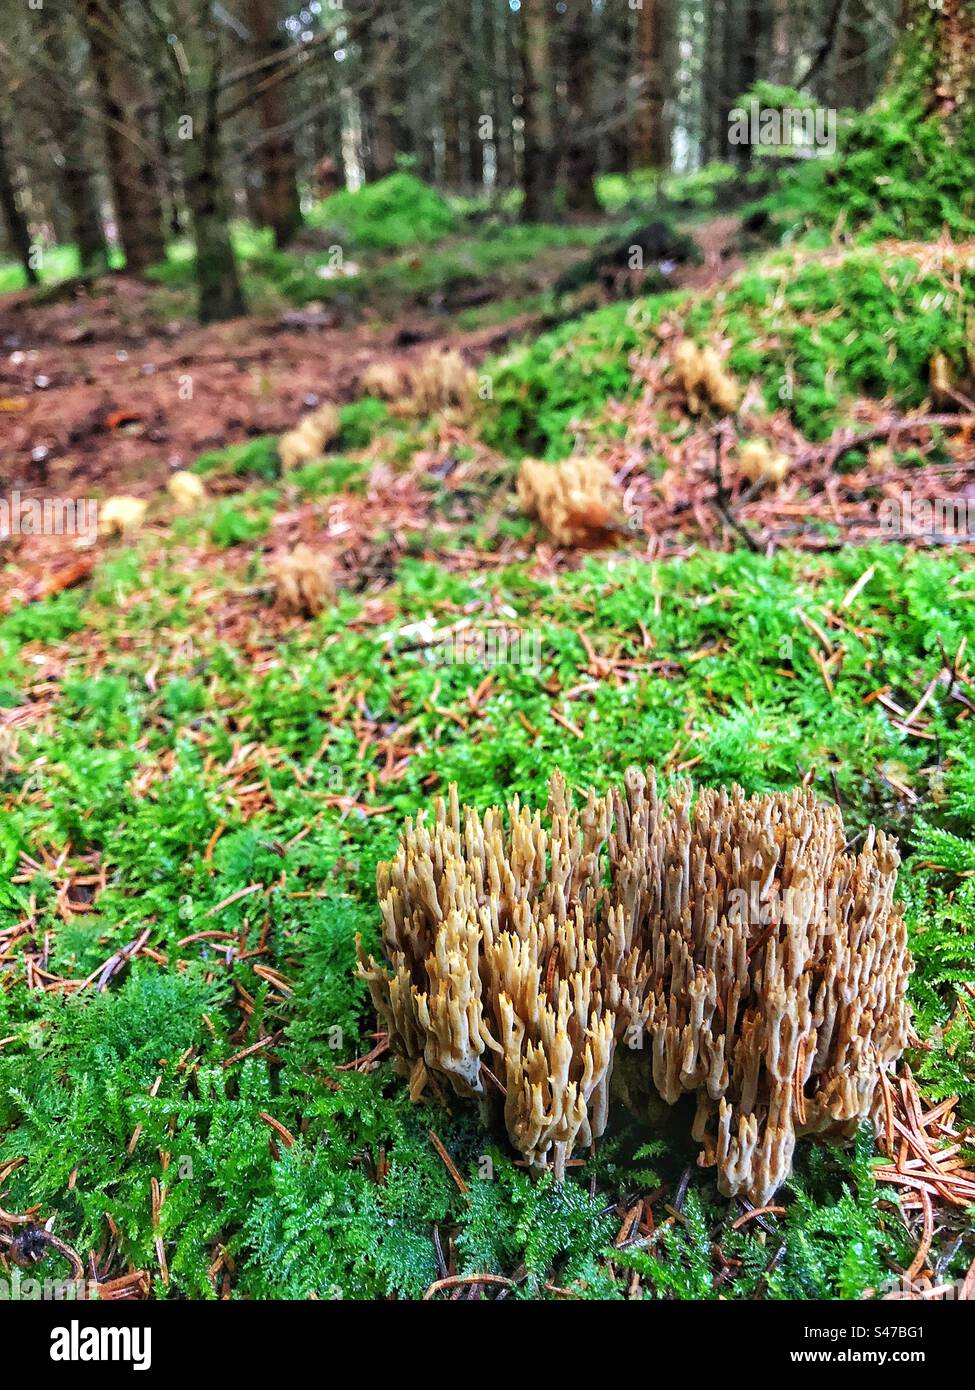 strict-branch coral (Samaria stricta) Growing in a pine forest near Winchester Hampshire United Kingdom Stock Photo